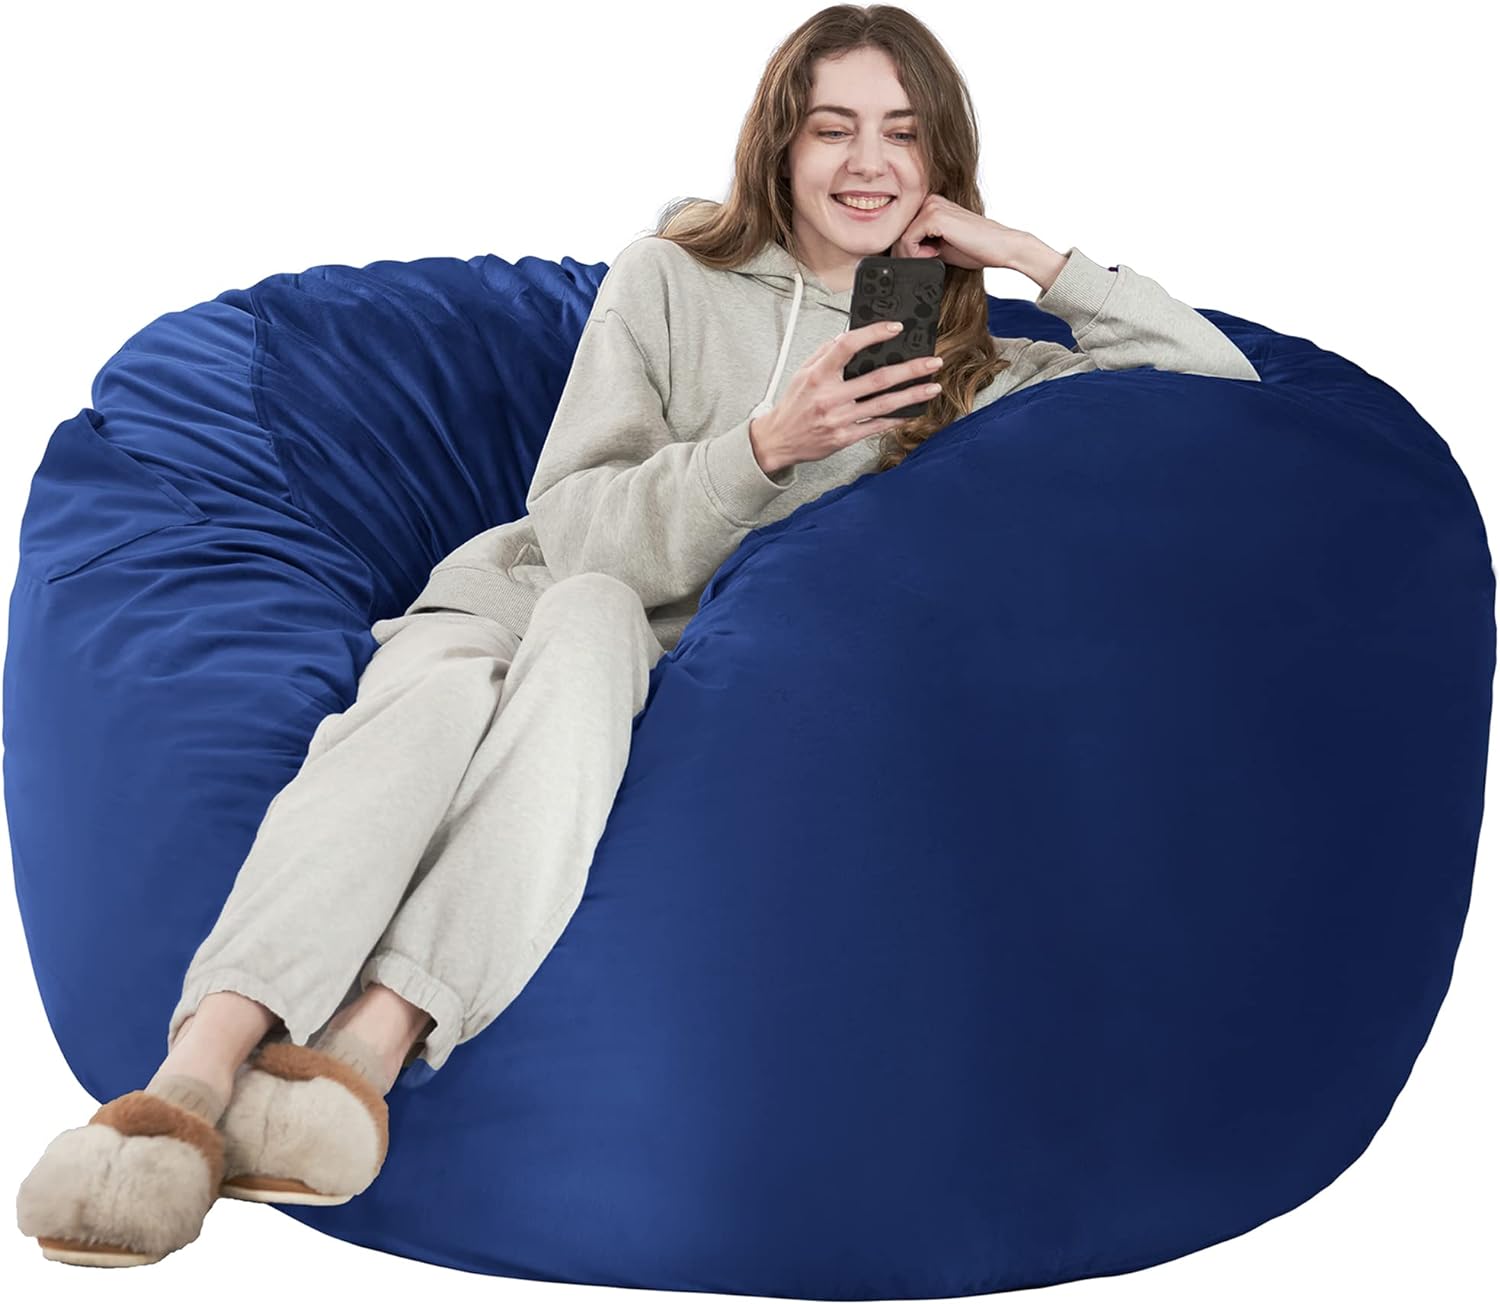 HABUTWAY Bean Bag Chair: Giant 4' Memory Foam Furniture Bean Bag Chairs for Adults with Microfiber Cover - 4Ft, Dark Blue